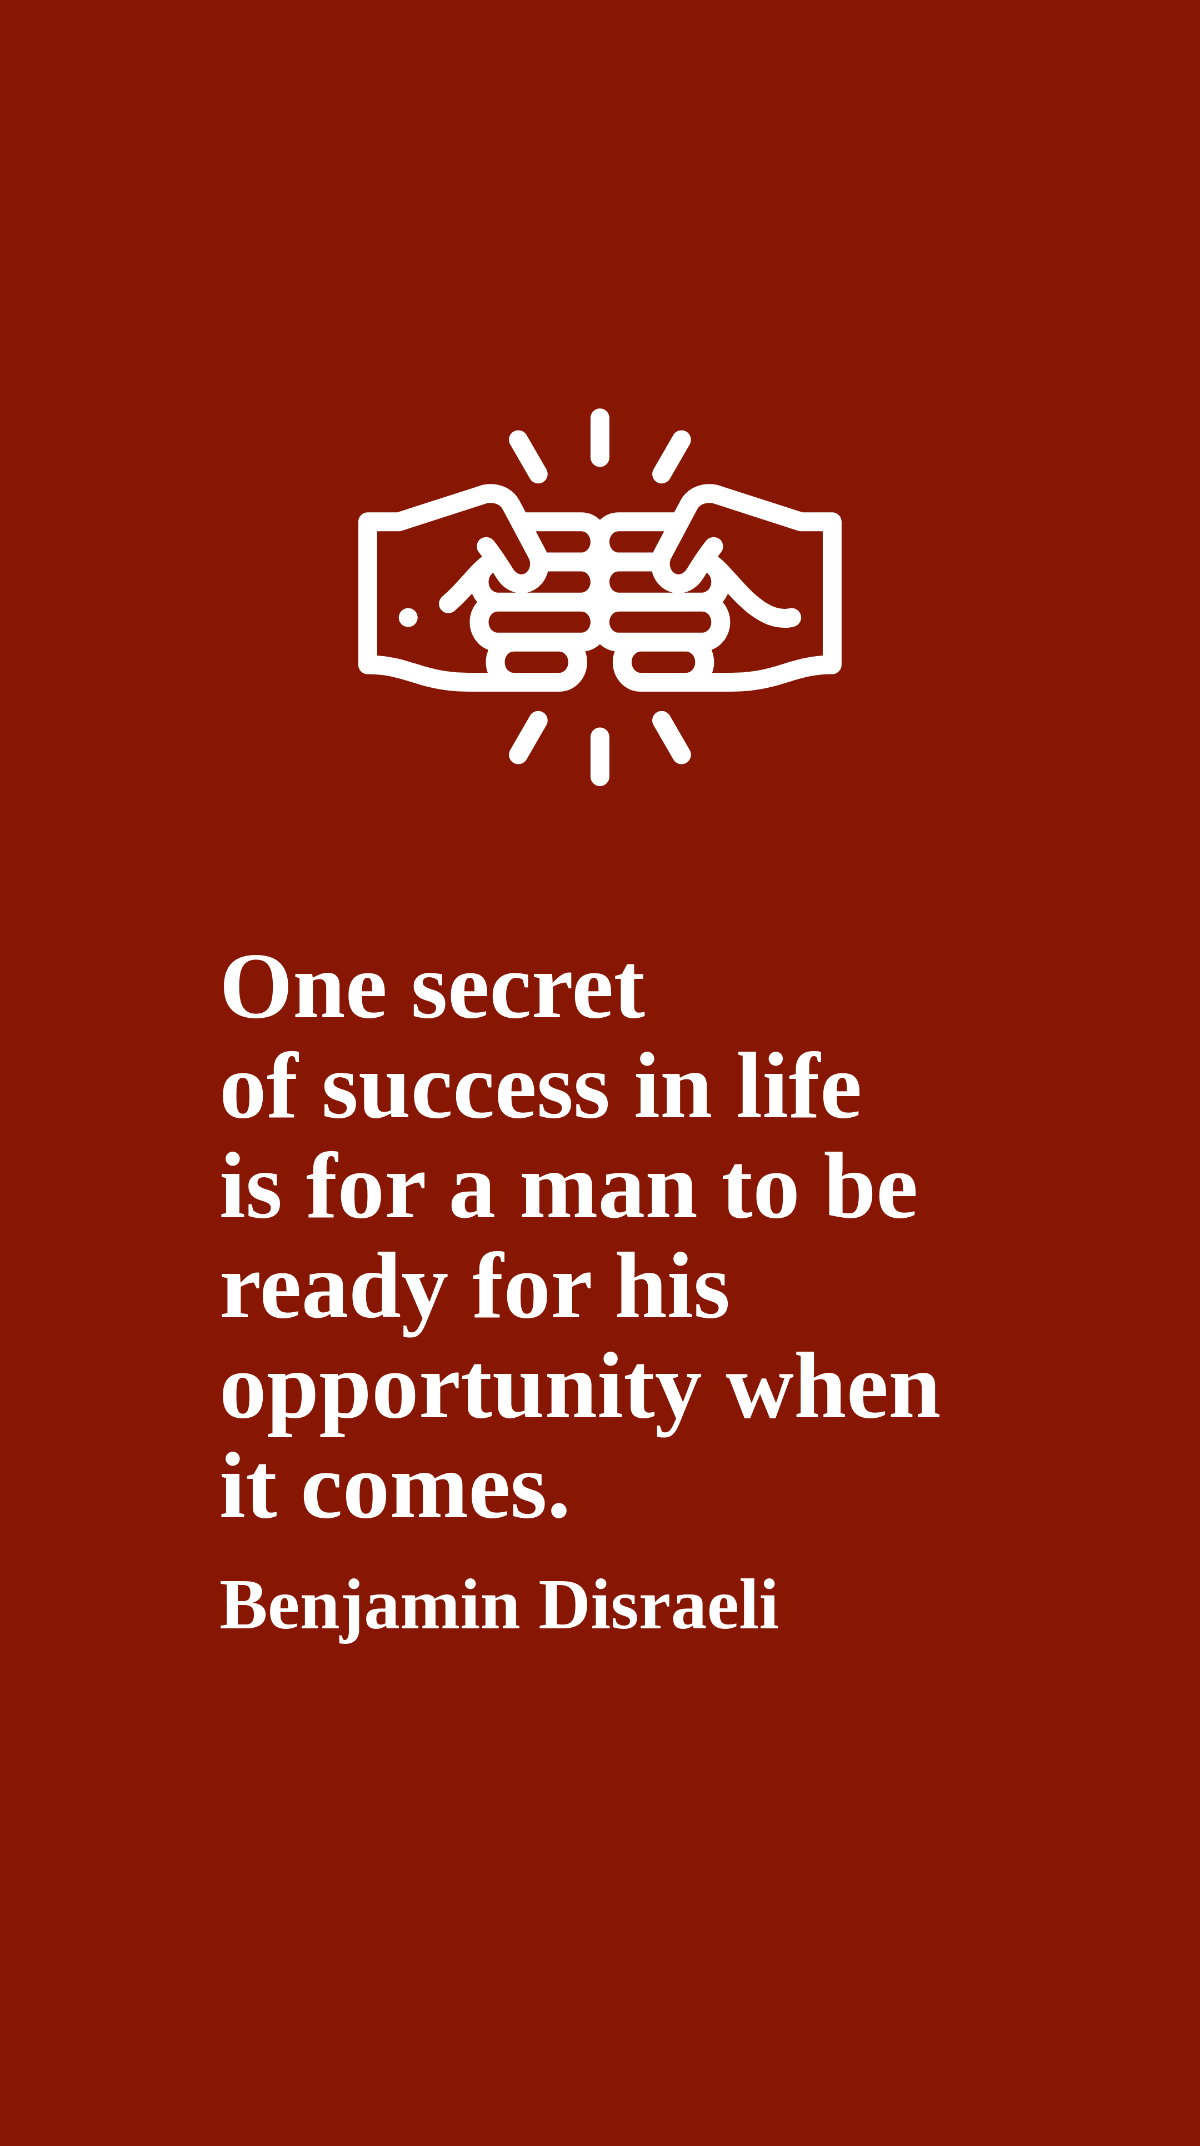 Benjamin Disraeli - One secret of success in life is for a man to be ready for his opportunity when it comes.